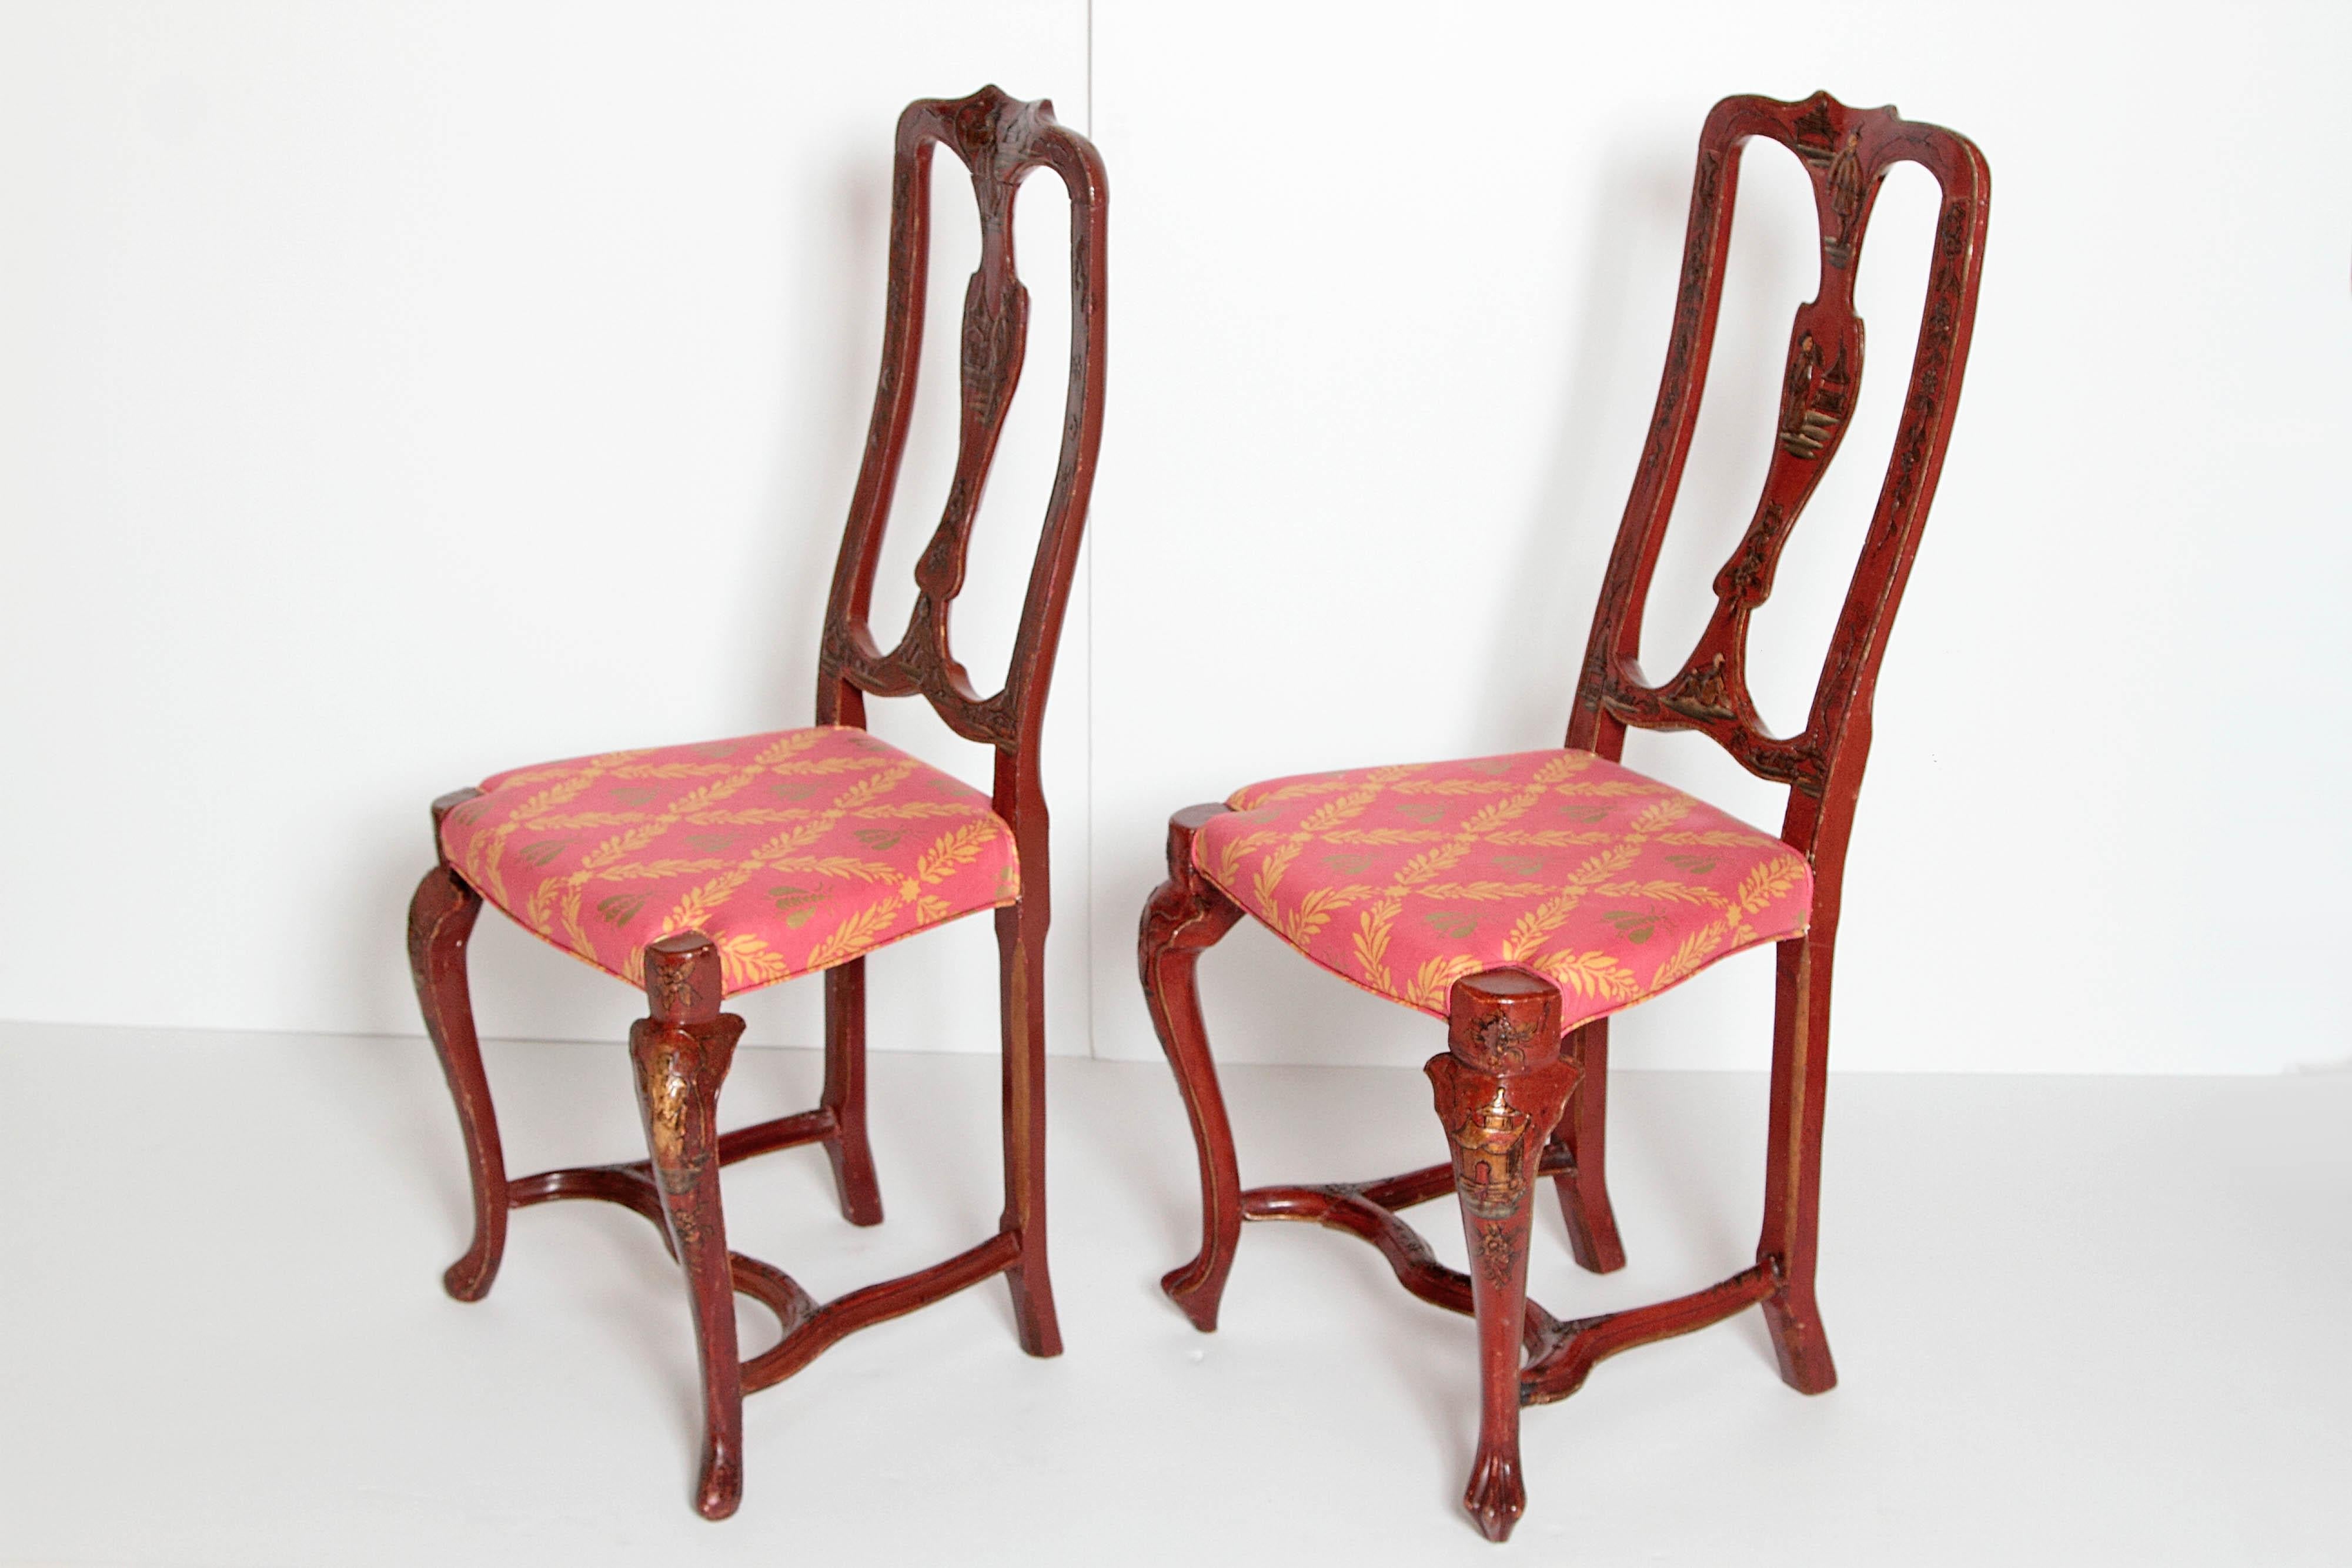 A pair of Queen Anne style carved and painted side chairs with upholstered seat. Chinoiserie decoration on back, cabriole legs and stretcher.